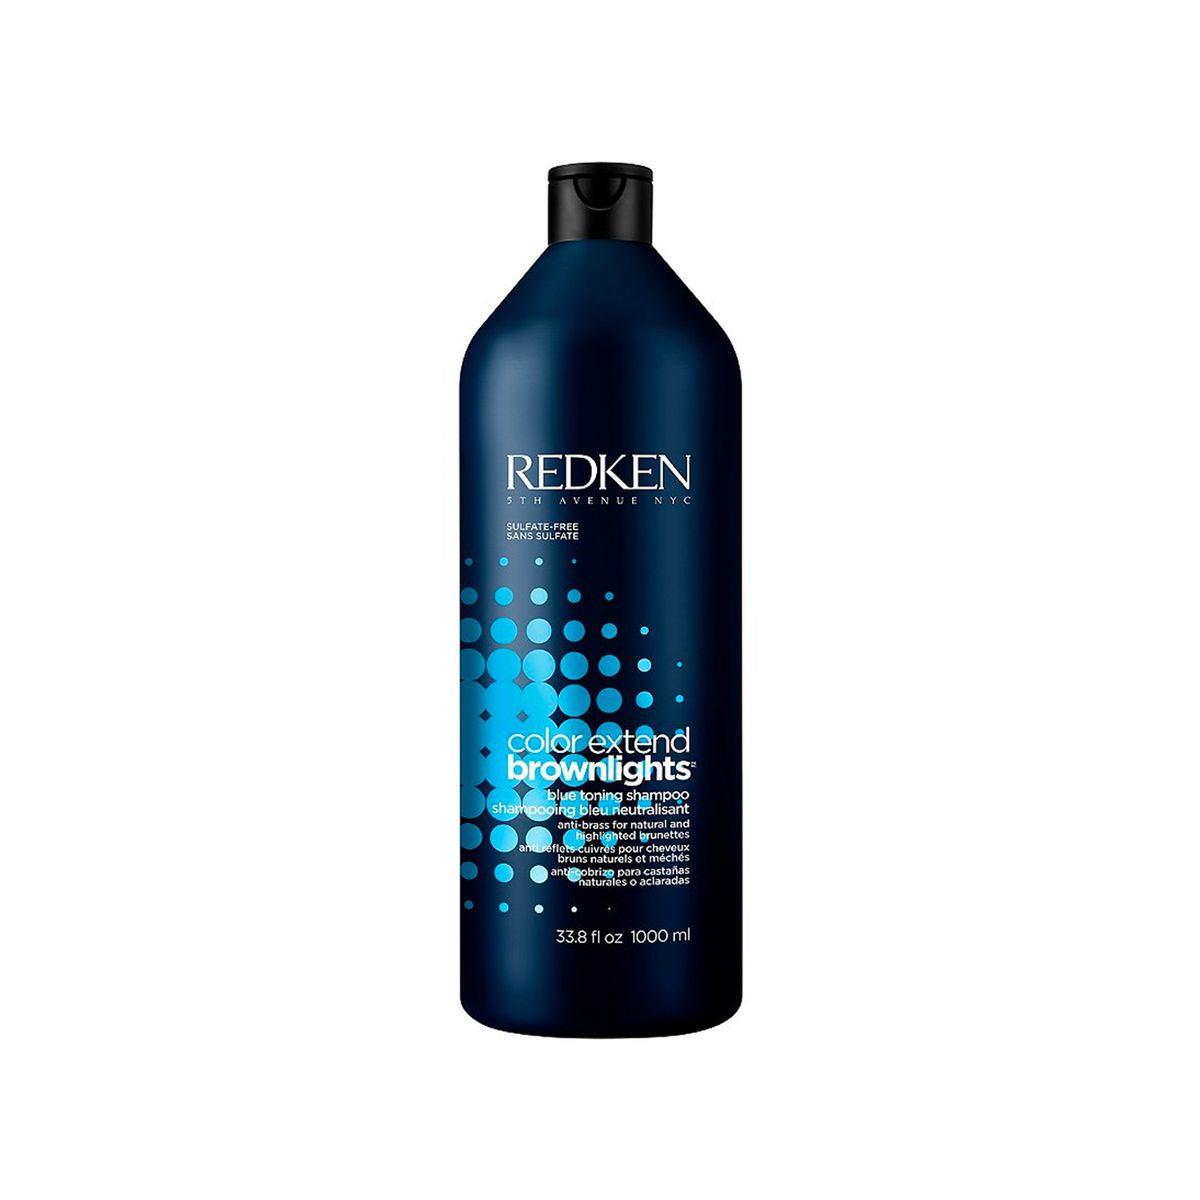 Best for Warm Brown Hair: Redken Color Extend Brownlights Blue Toning Sulfate-Free Shampoo